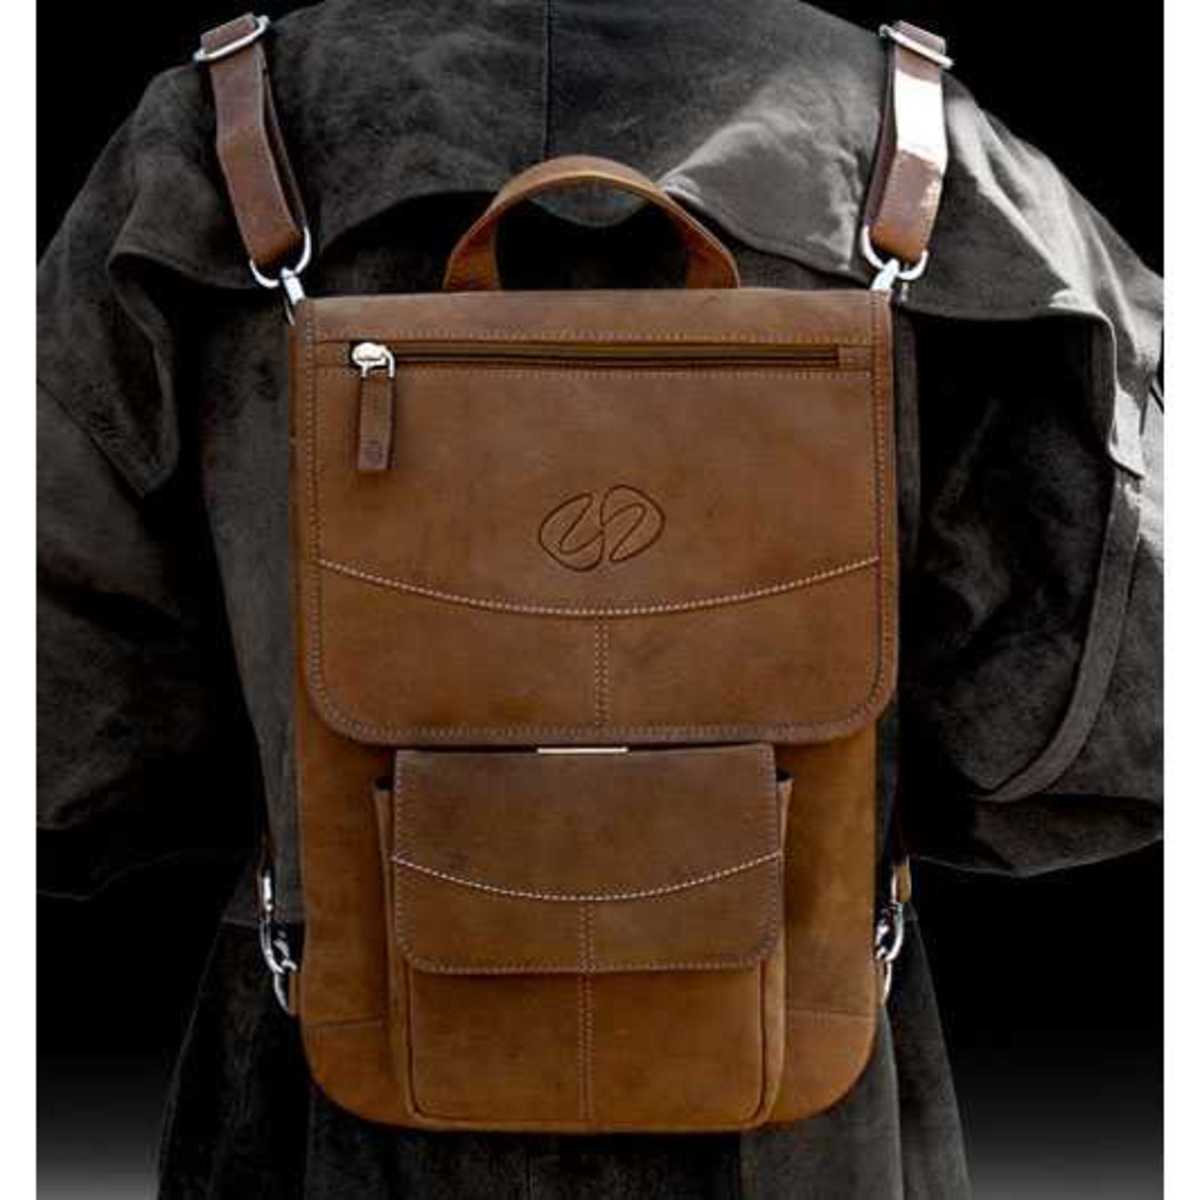 The 10 Best iPad Backpacks | HubPages